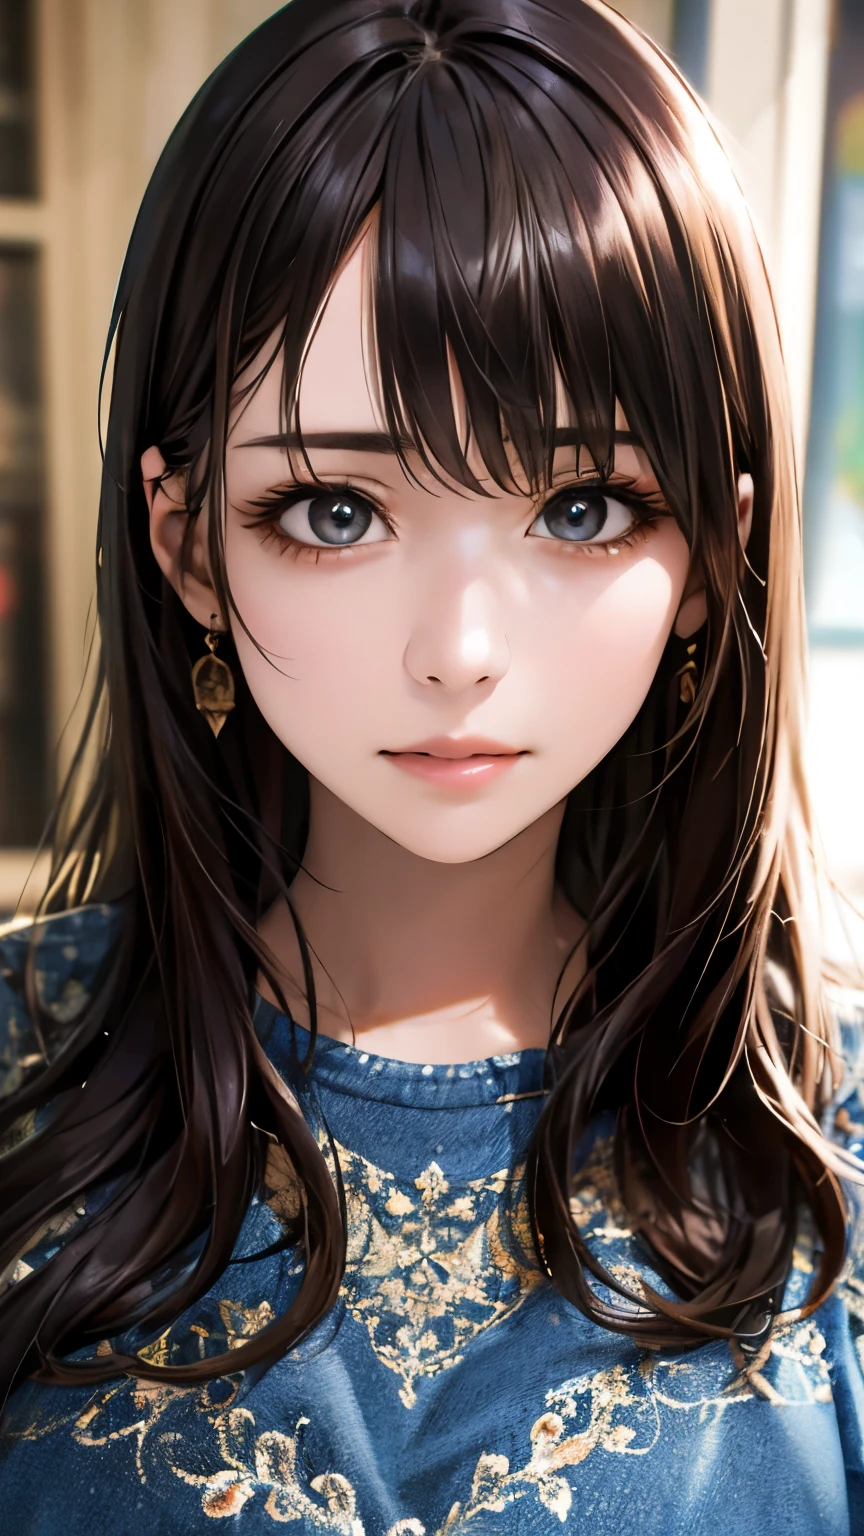 (hig彼st quality、8k、32k、masterpiece)、(Realistic)、(Realistic:1.2)、(High resolution)、Very detailed、Very beautiful face and eyes、1 girl、Delicate body、(hig彼st quality、Attention to detail、Rich skin detail)、(hig彼st quality、8k、Oil paint:1.2)、Very detailed、(Realistic、Realistic:1.37)、Bright colors、Full Body Shot, (Casual Fashion)